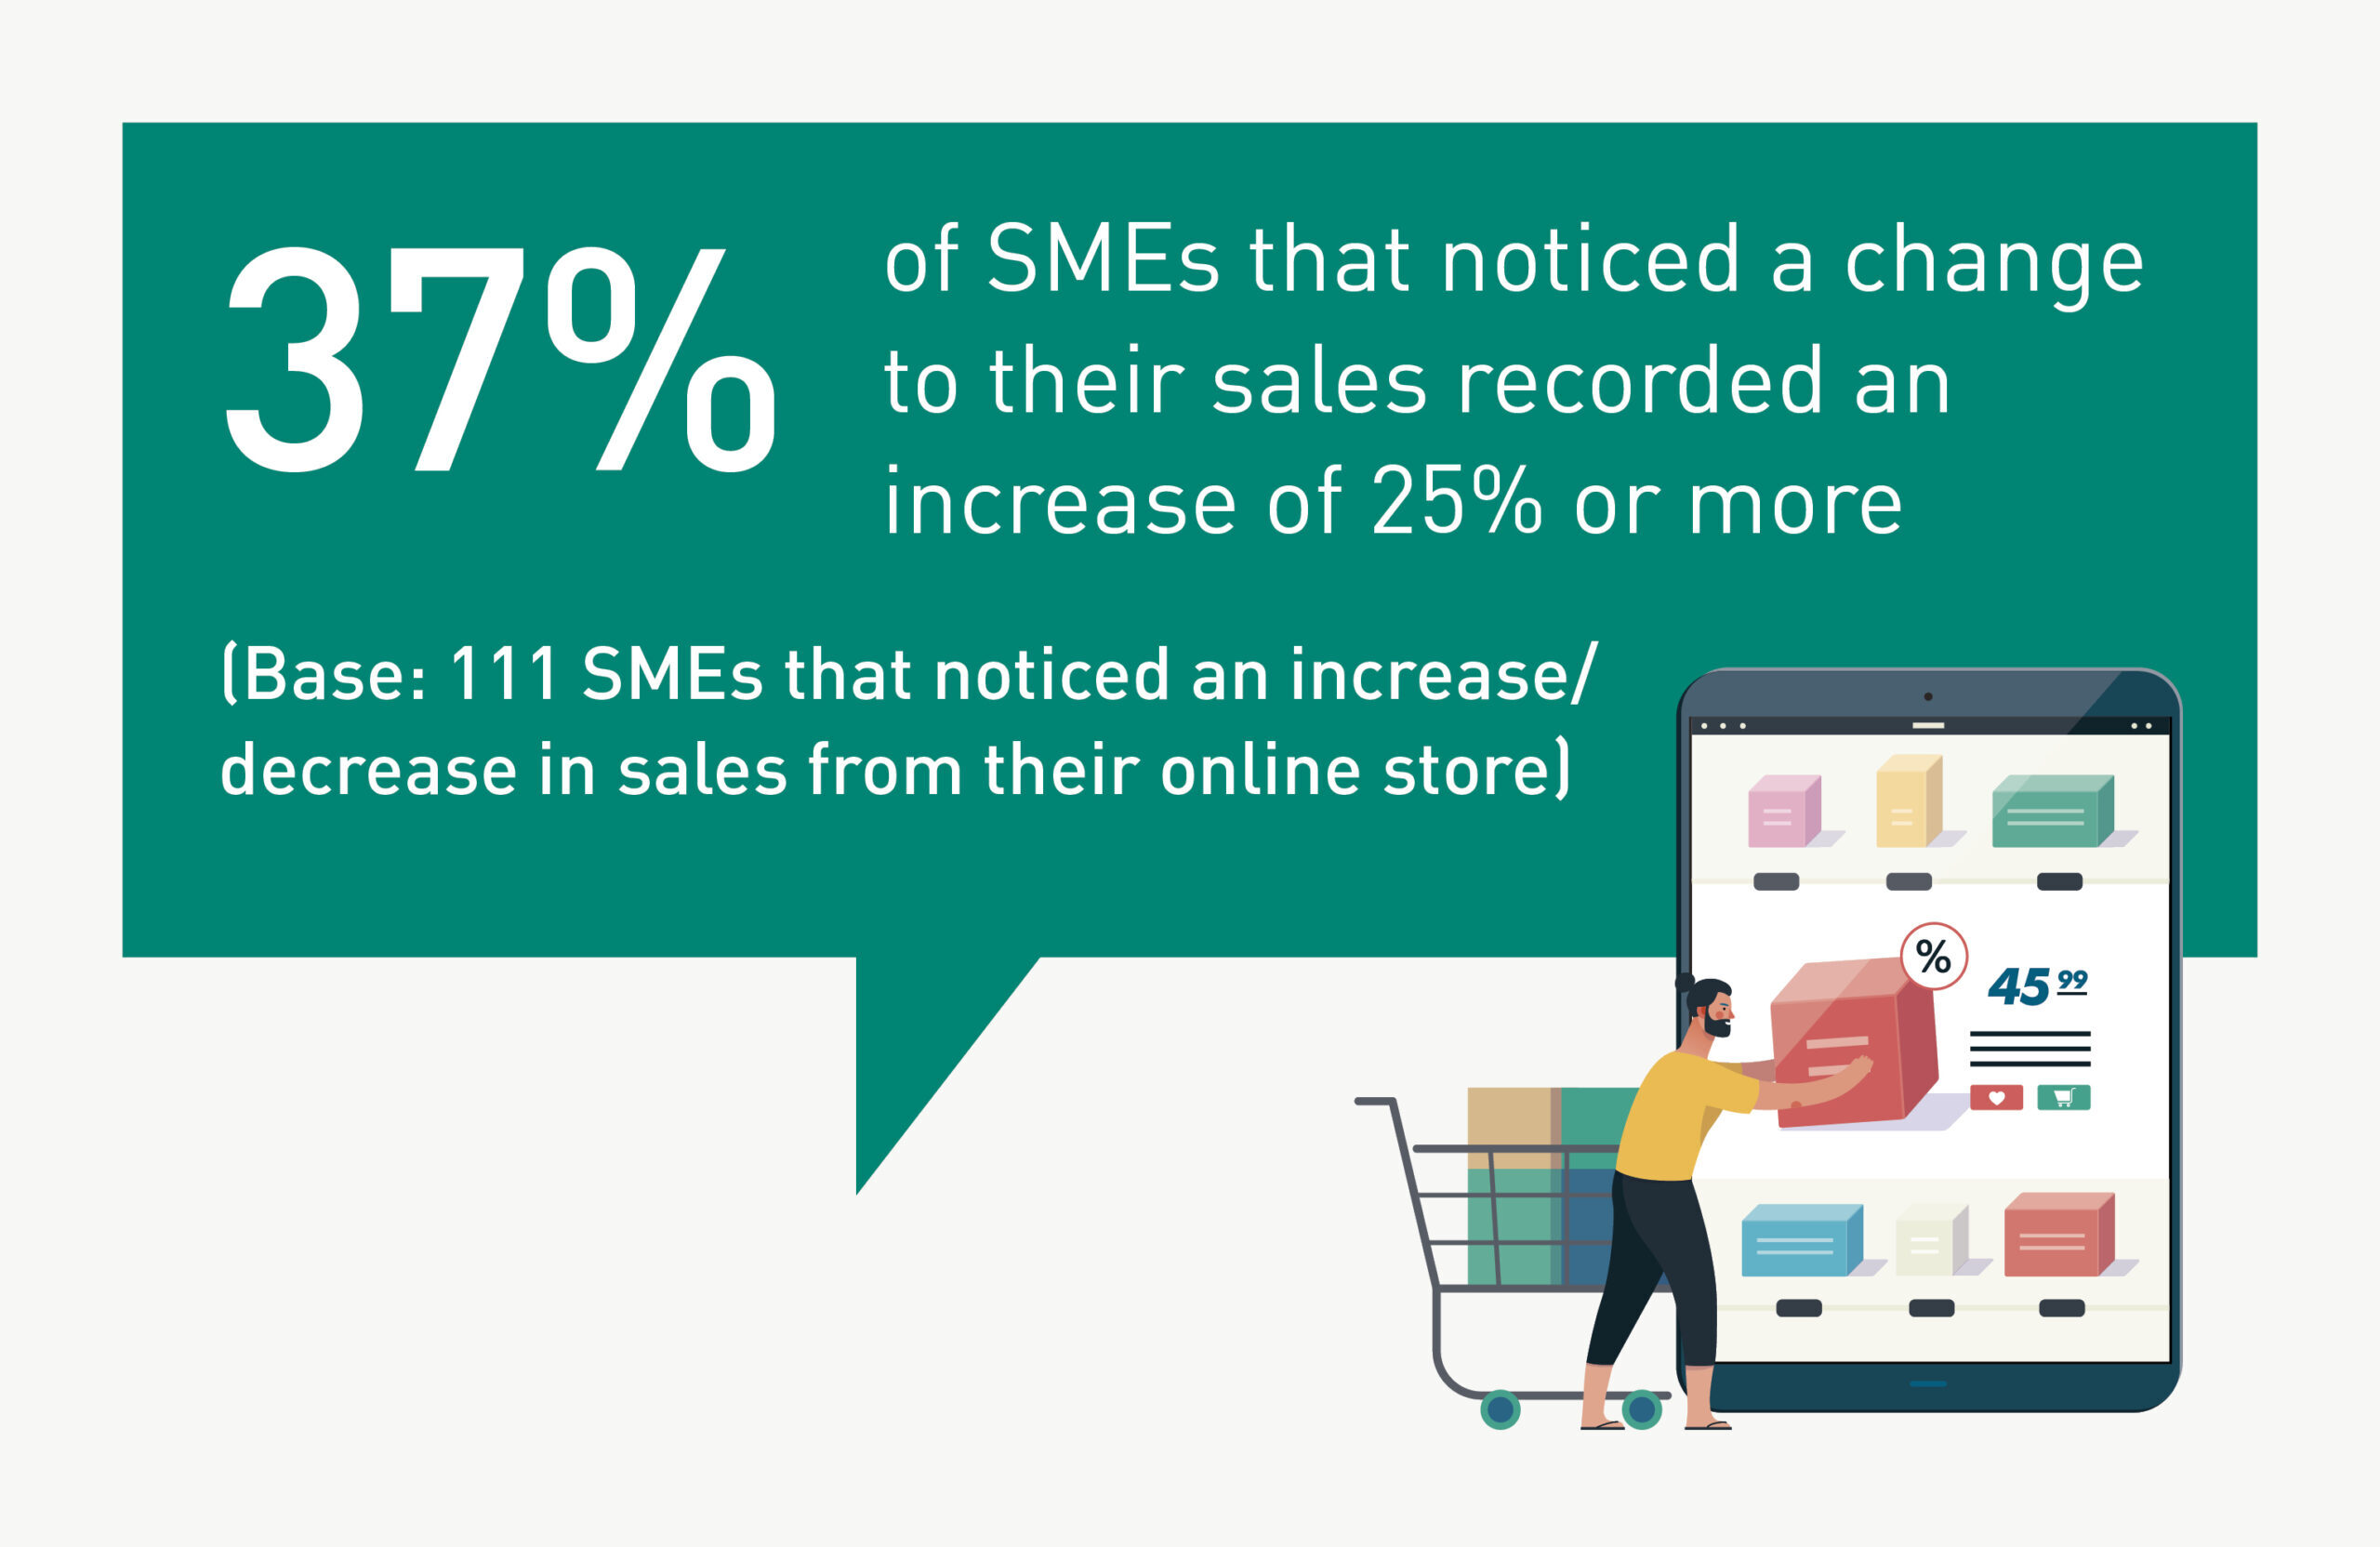 Irish SMEs win online - 37% SMEs noticed change in sales